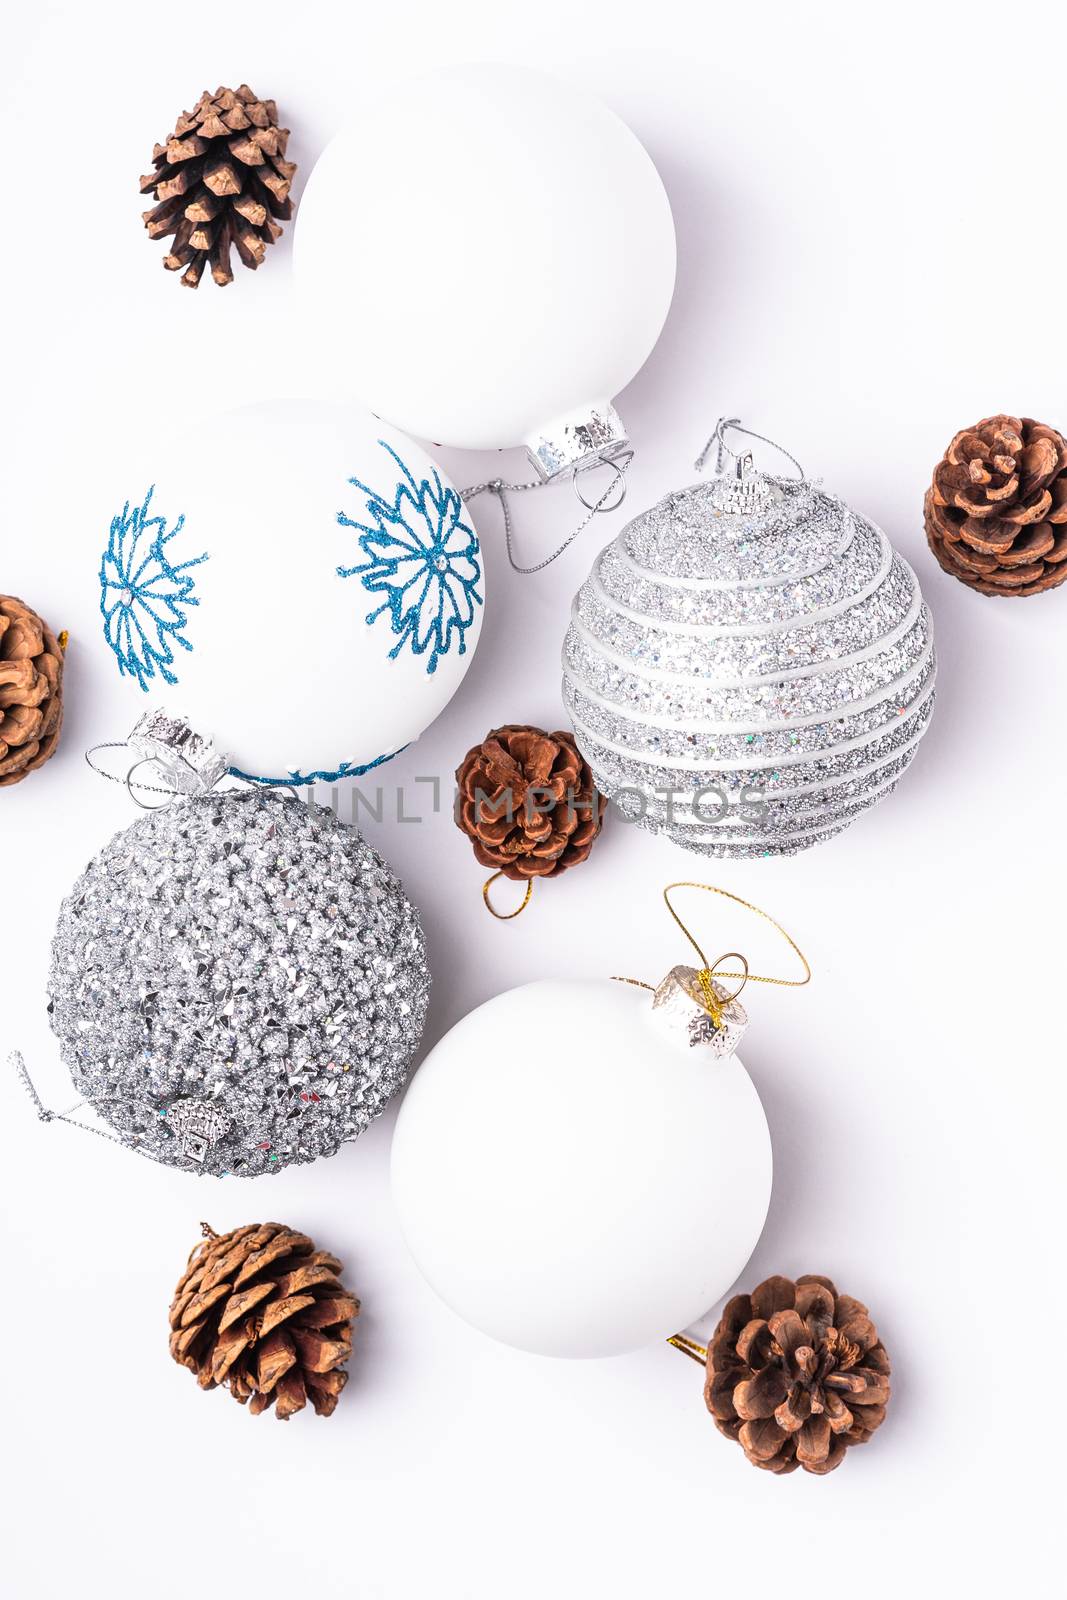 Christmas New Year composition. Gifts, fir tree cones, silver ball decorations on white background. Winter holidays concept. Flat lay, top view